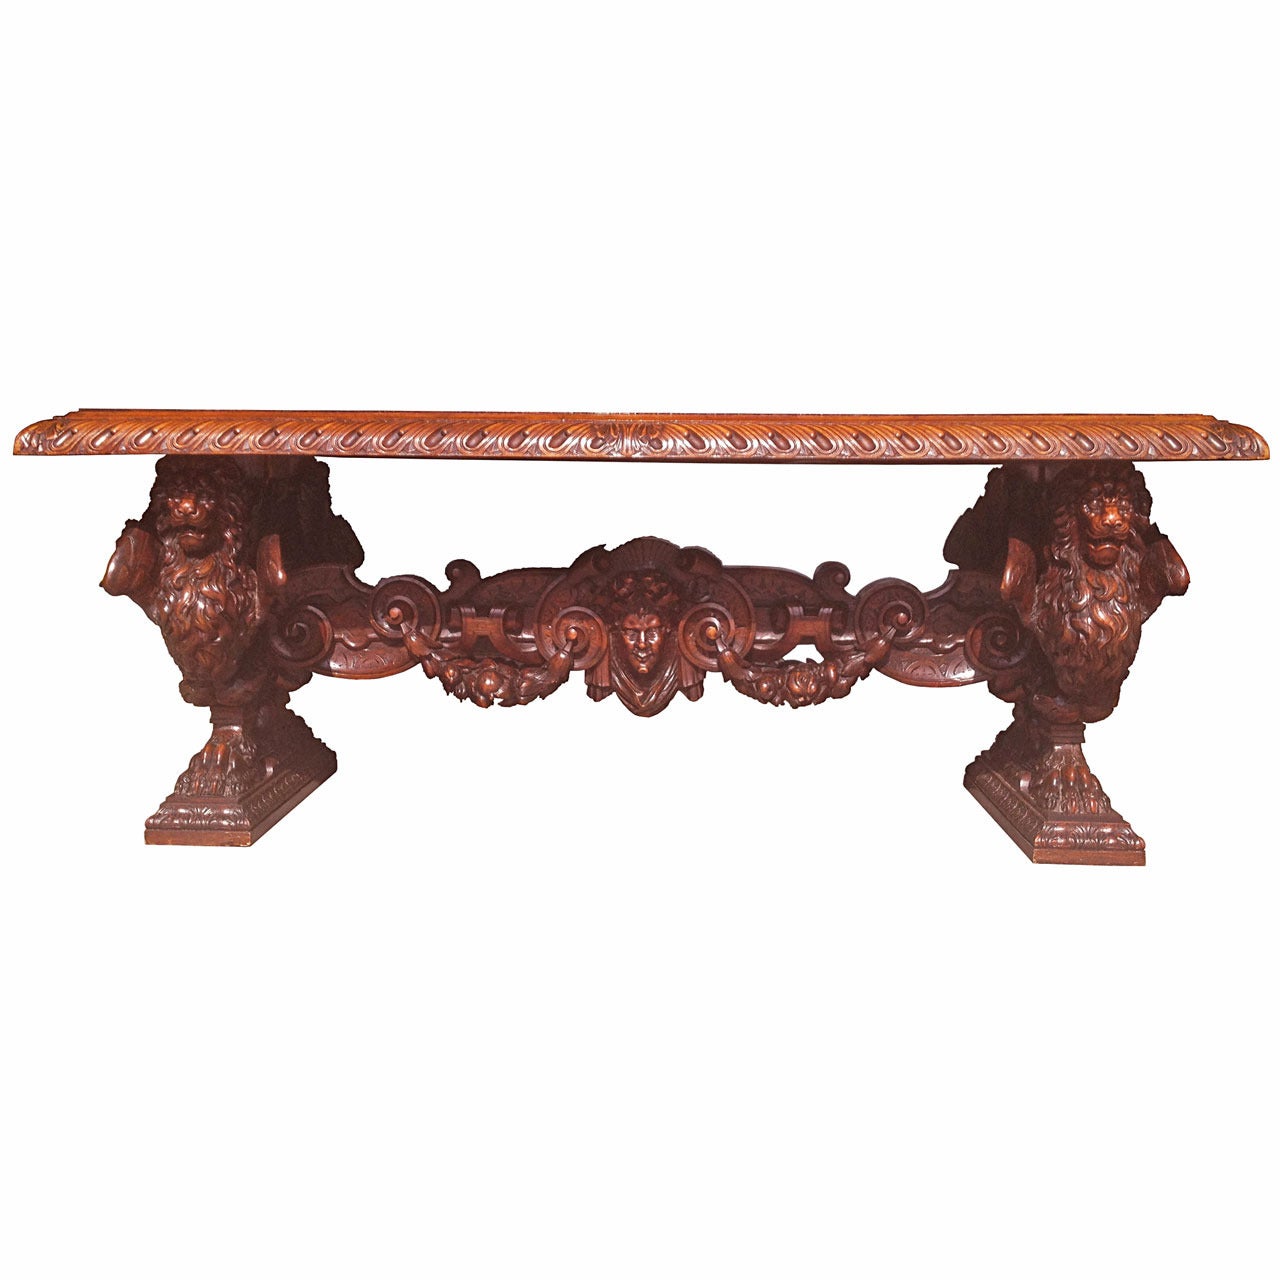 Ornately hand-carved wooden table by world famous Venetian sculptor Valentino Panciera Besarel (1829–1902). Solid wood table with cupid carving in center and Italian style Venetian lions head carvings throughout. Beautiful dark colored wood. 
The